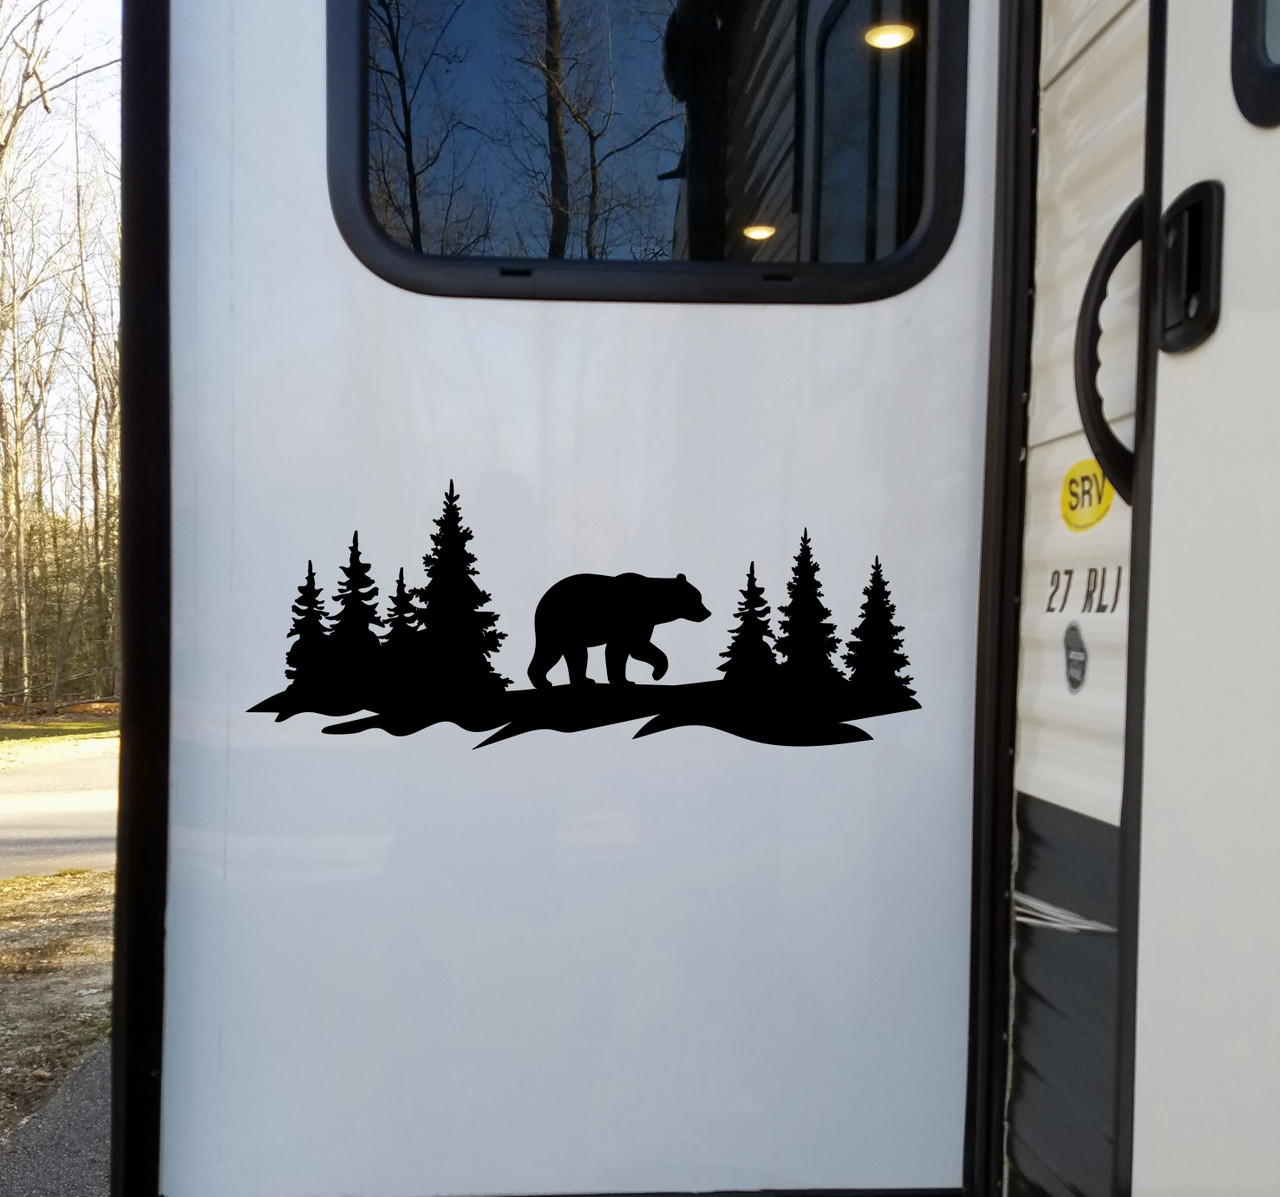 Man Off Road Rv For Salejeep Off-road Graphics Vinyl Stickers